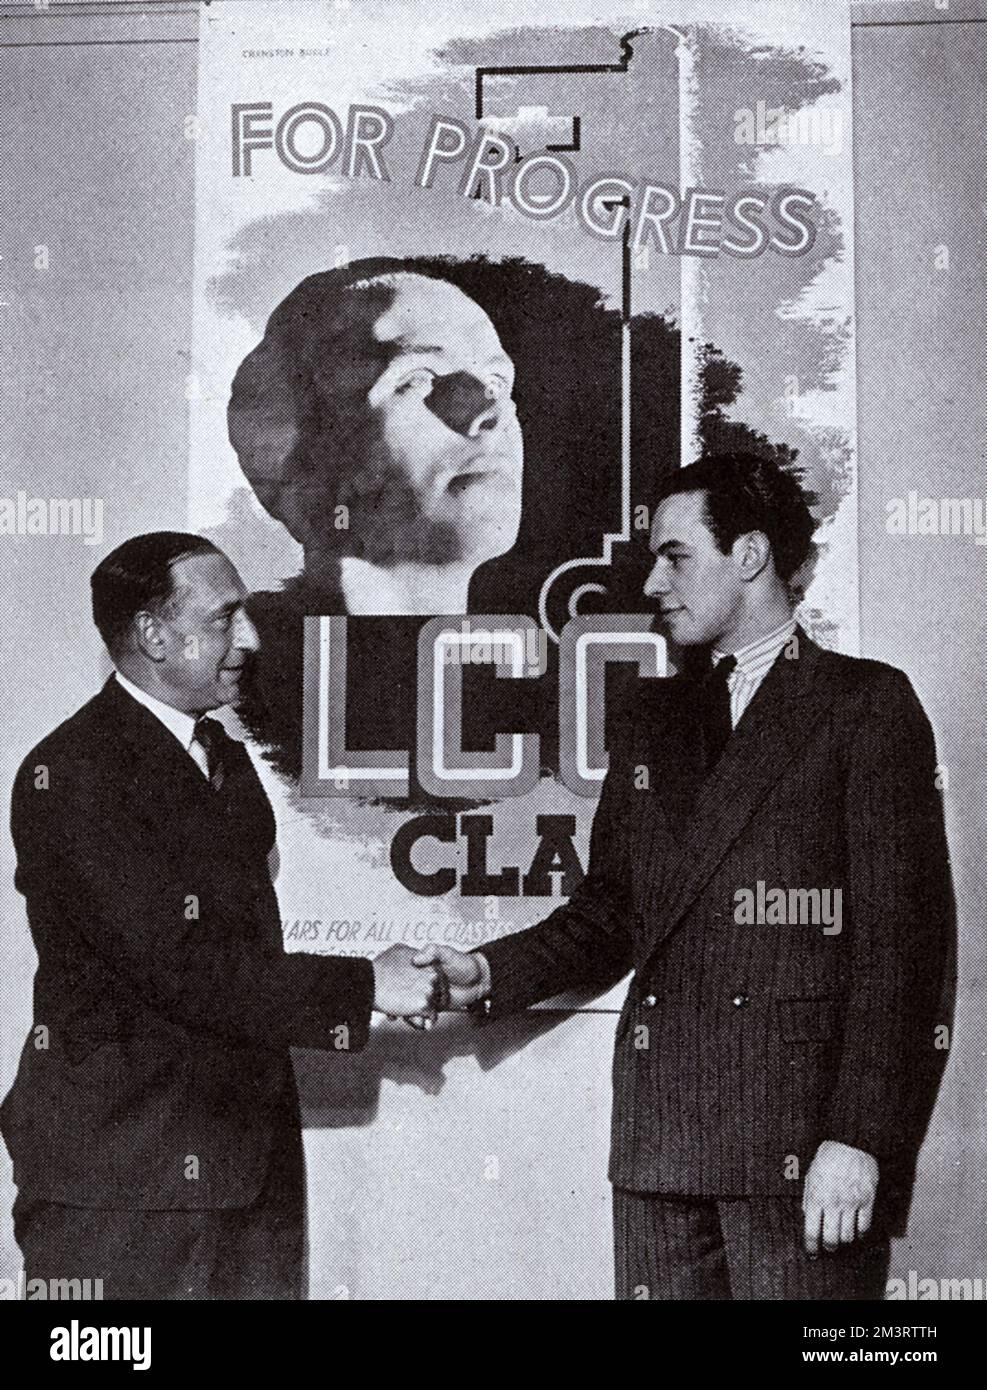 G. Cranston Bogle, a young Yorkshire artist, receiving his prize for designing a poster to promote evening classes run by London County Council.  He won the 50 prize over 800 entries.  He had just left Bradford College of Arts and Crafts and begun work as a designer for a London publishing firm.  Pictured shaking hands with L. Hertel, the publicity officer for the LCC evening classes, with his winning design in the background.  The young man in the picture was George Bogle, father of Nigel Bogle, founder of the advertising agency Bartle Bogle Hegarty.  George was also an adman and implemented Stock Photo